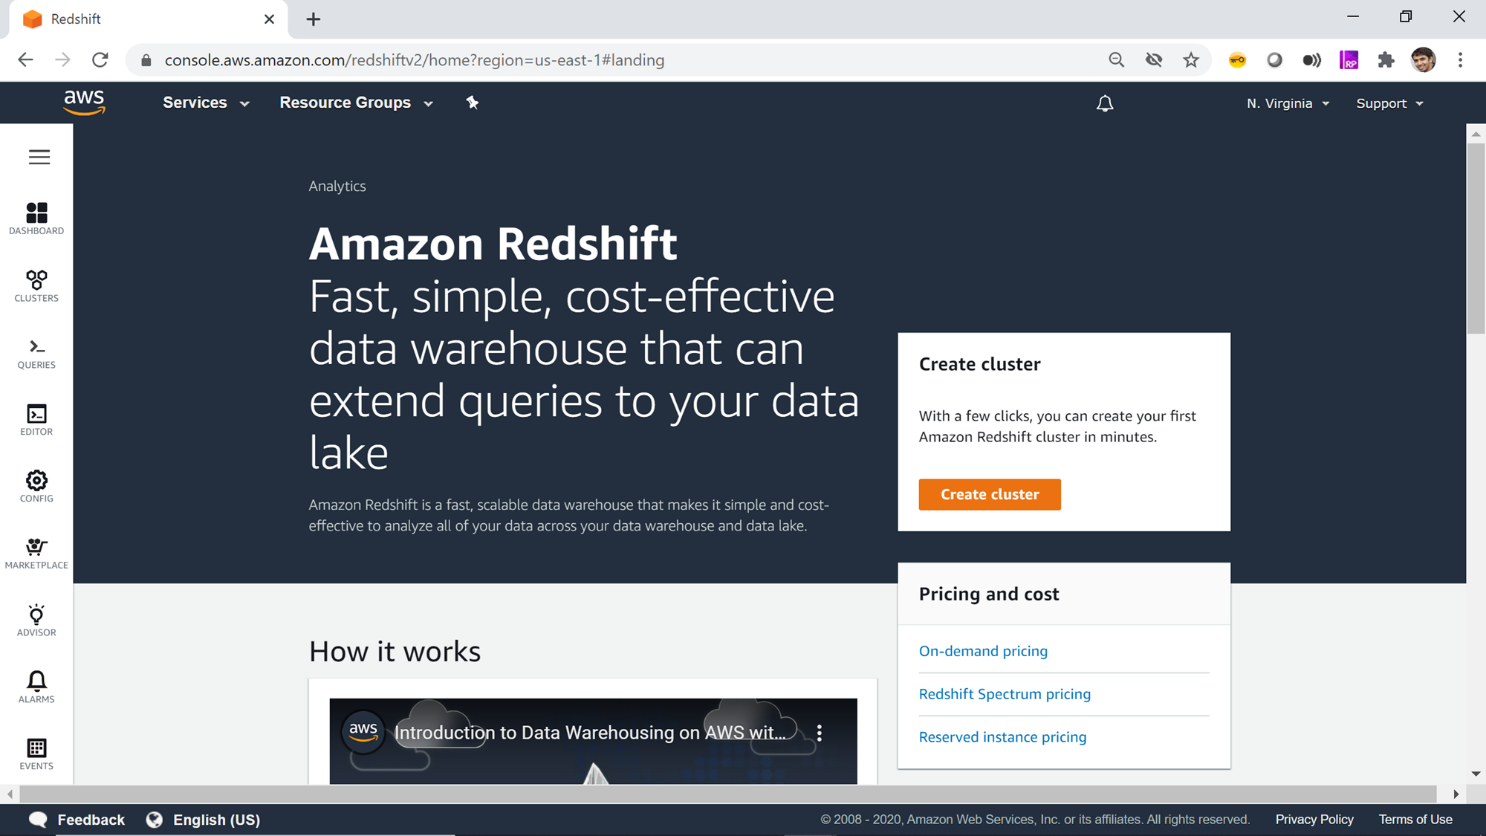 Getting started with AWS Redshift